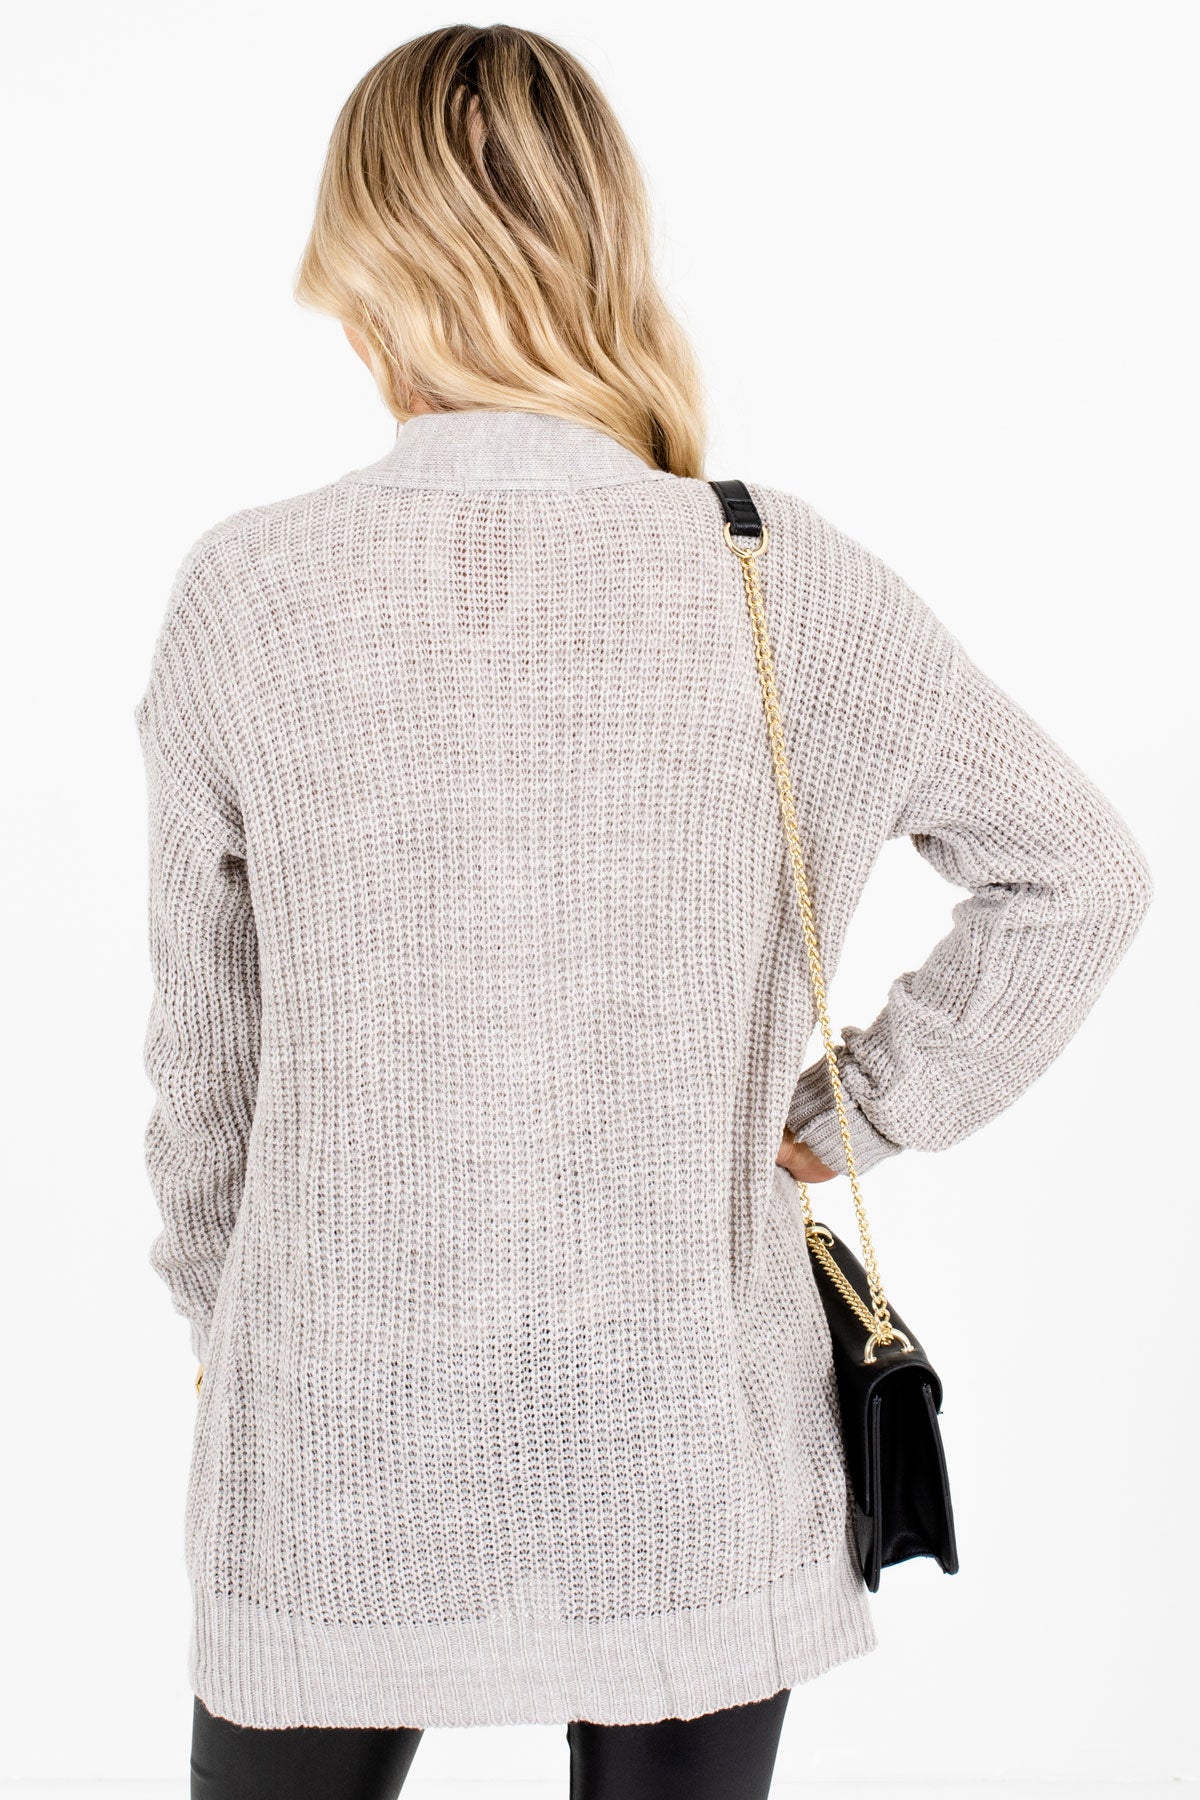 Women’s Heather Gray Boutique Cardigans with Pockets